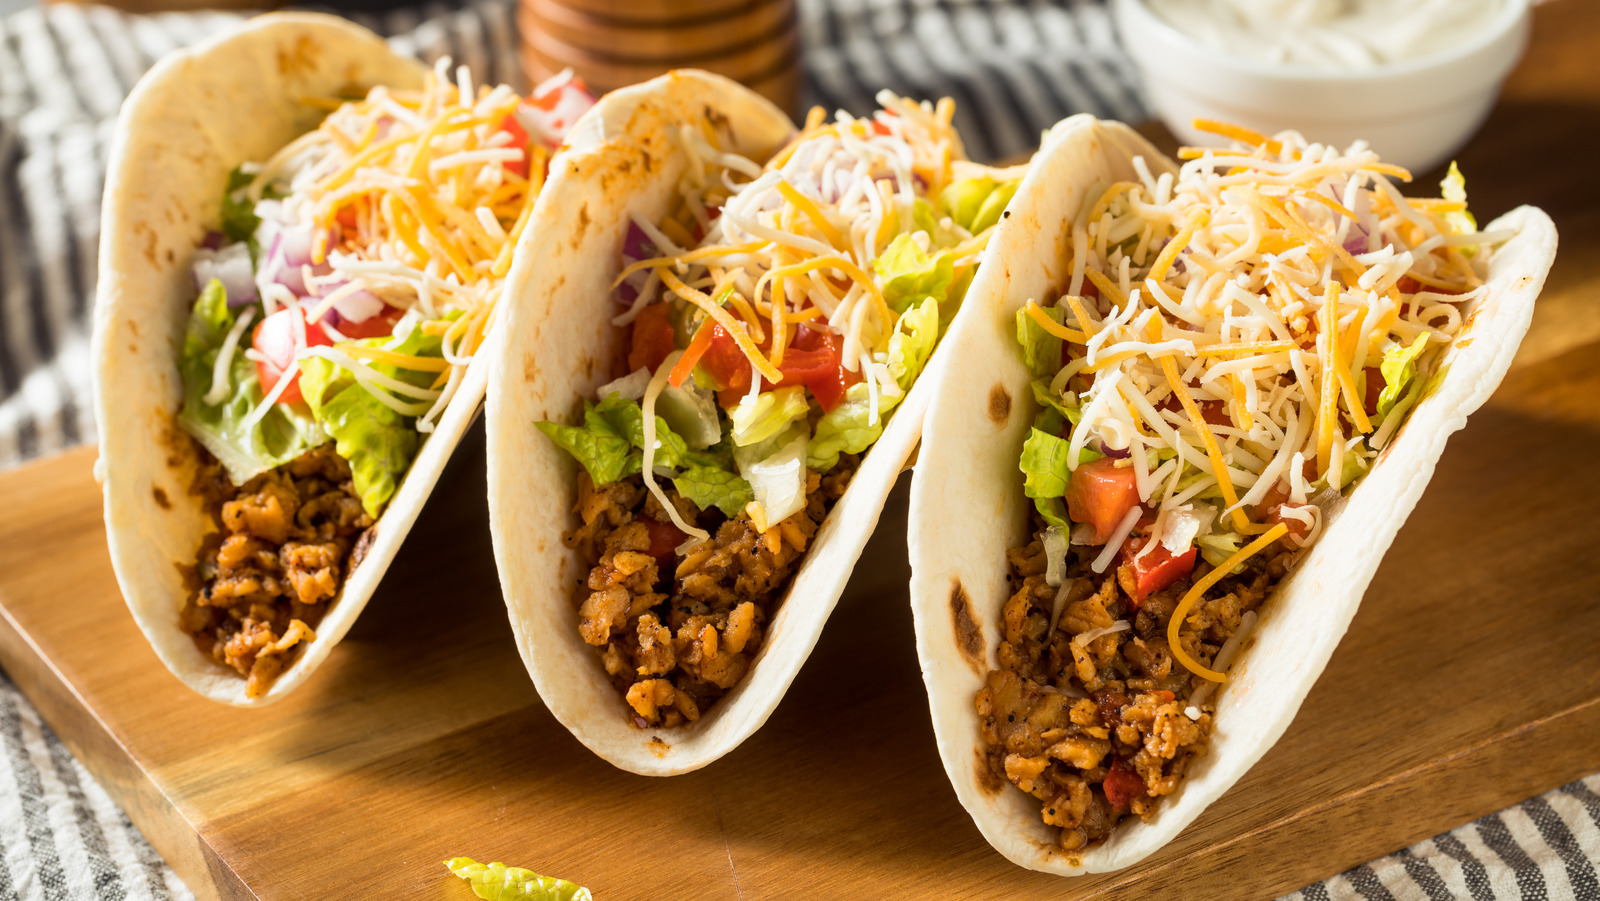 Daily Meal's Exclusive Survey Uncovers The Best Cheese To Use For Tacos